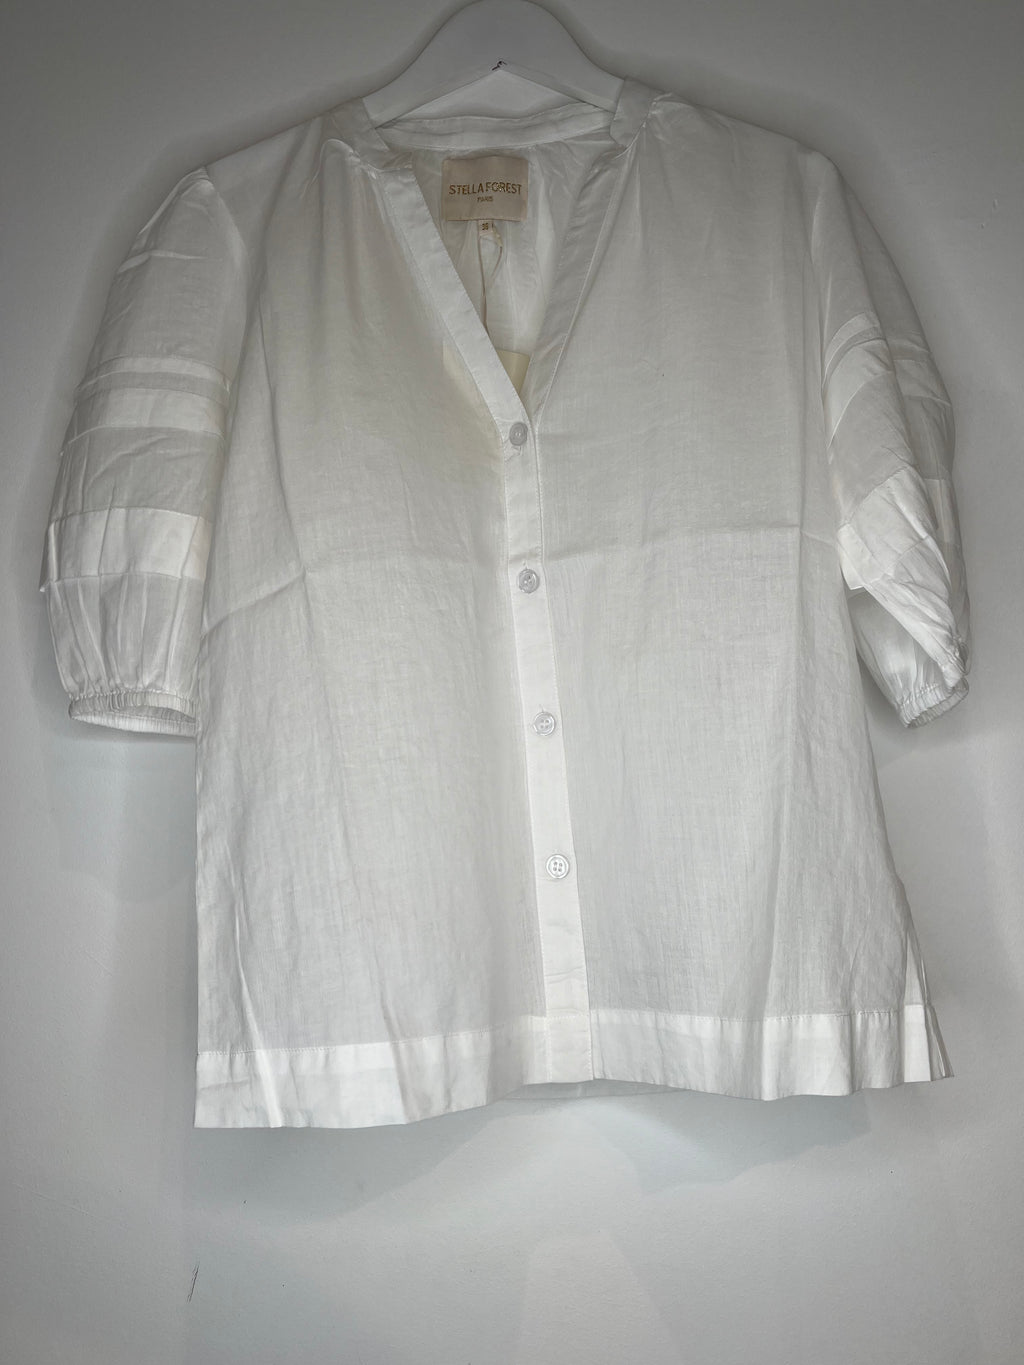 Hetre Alresford Hampshire Clothes Store Stella Forest White Blouse